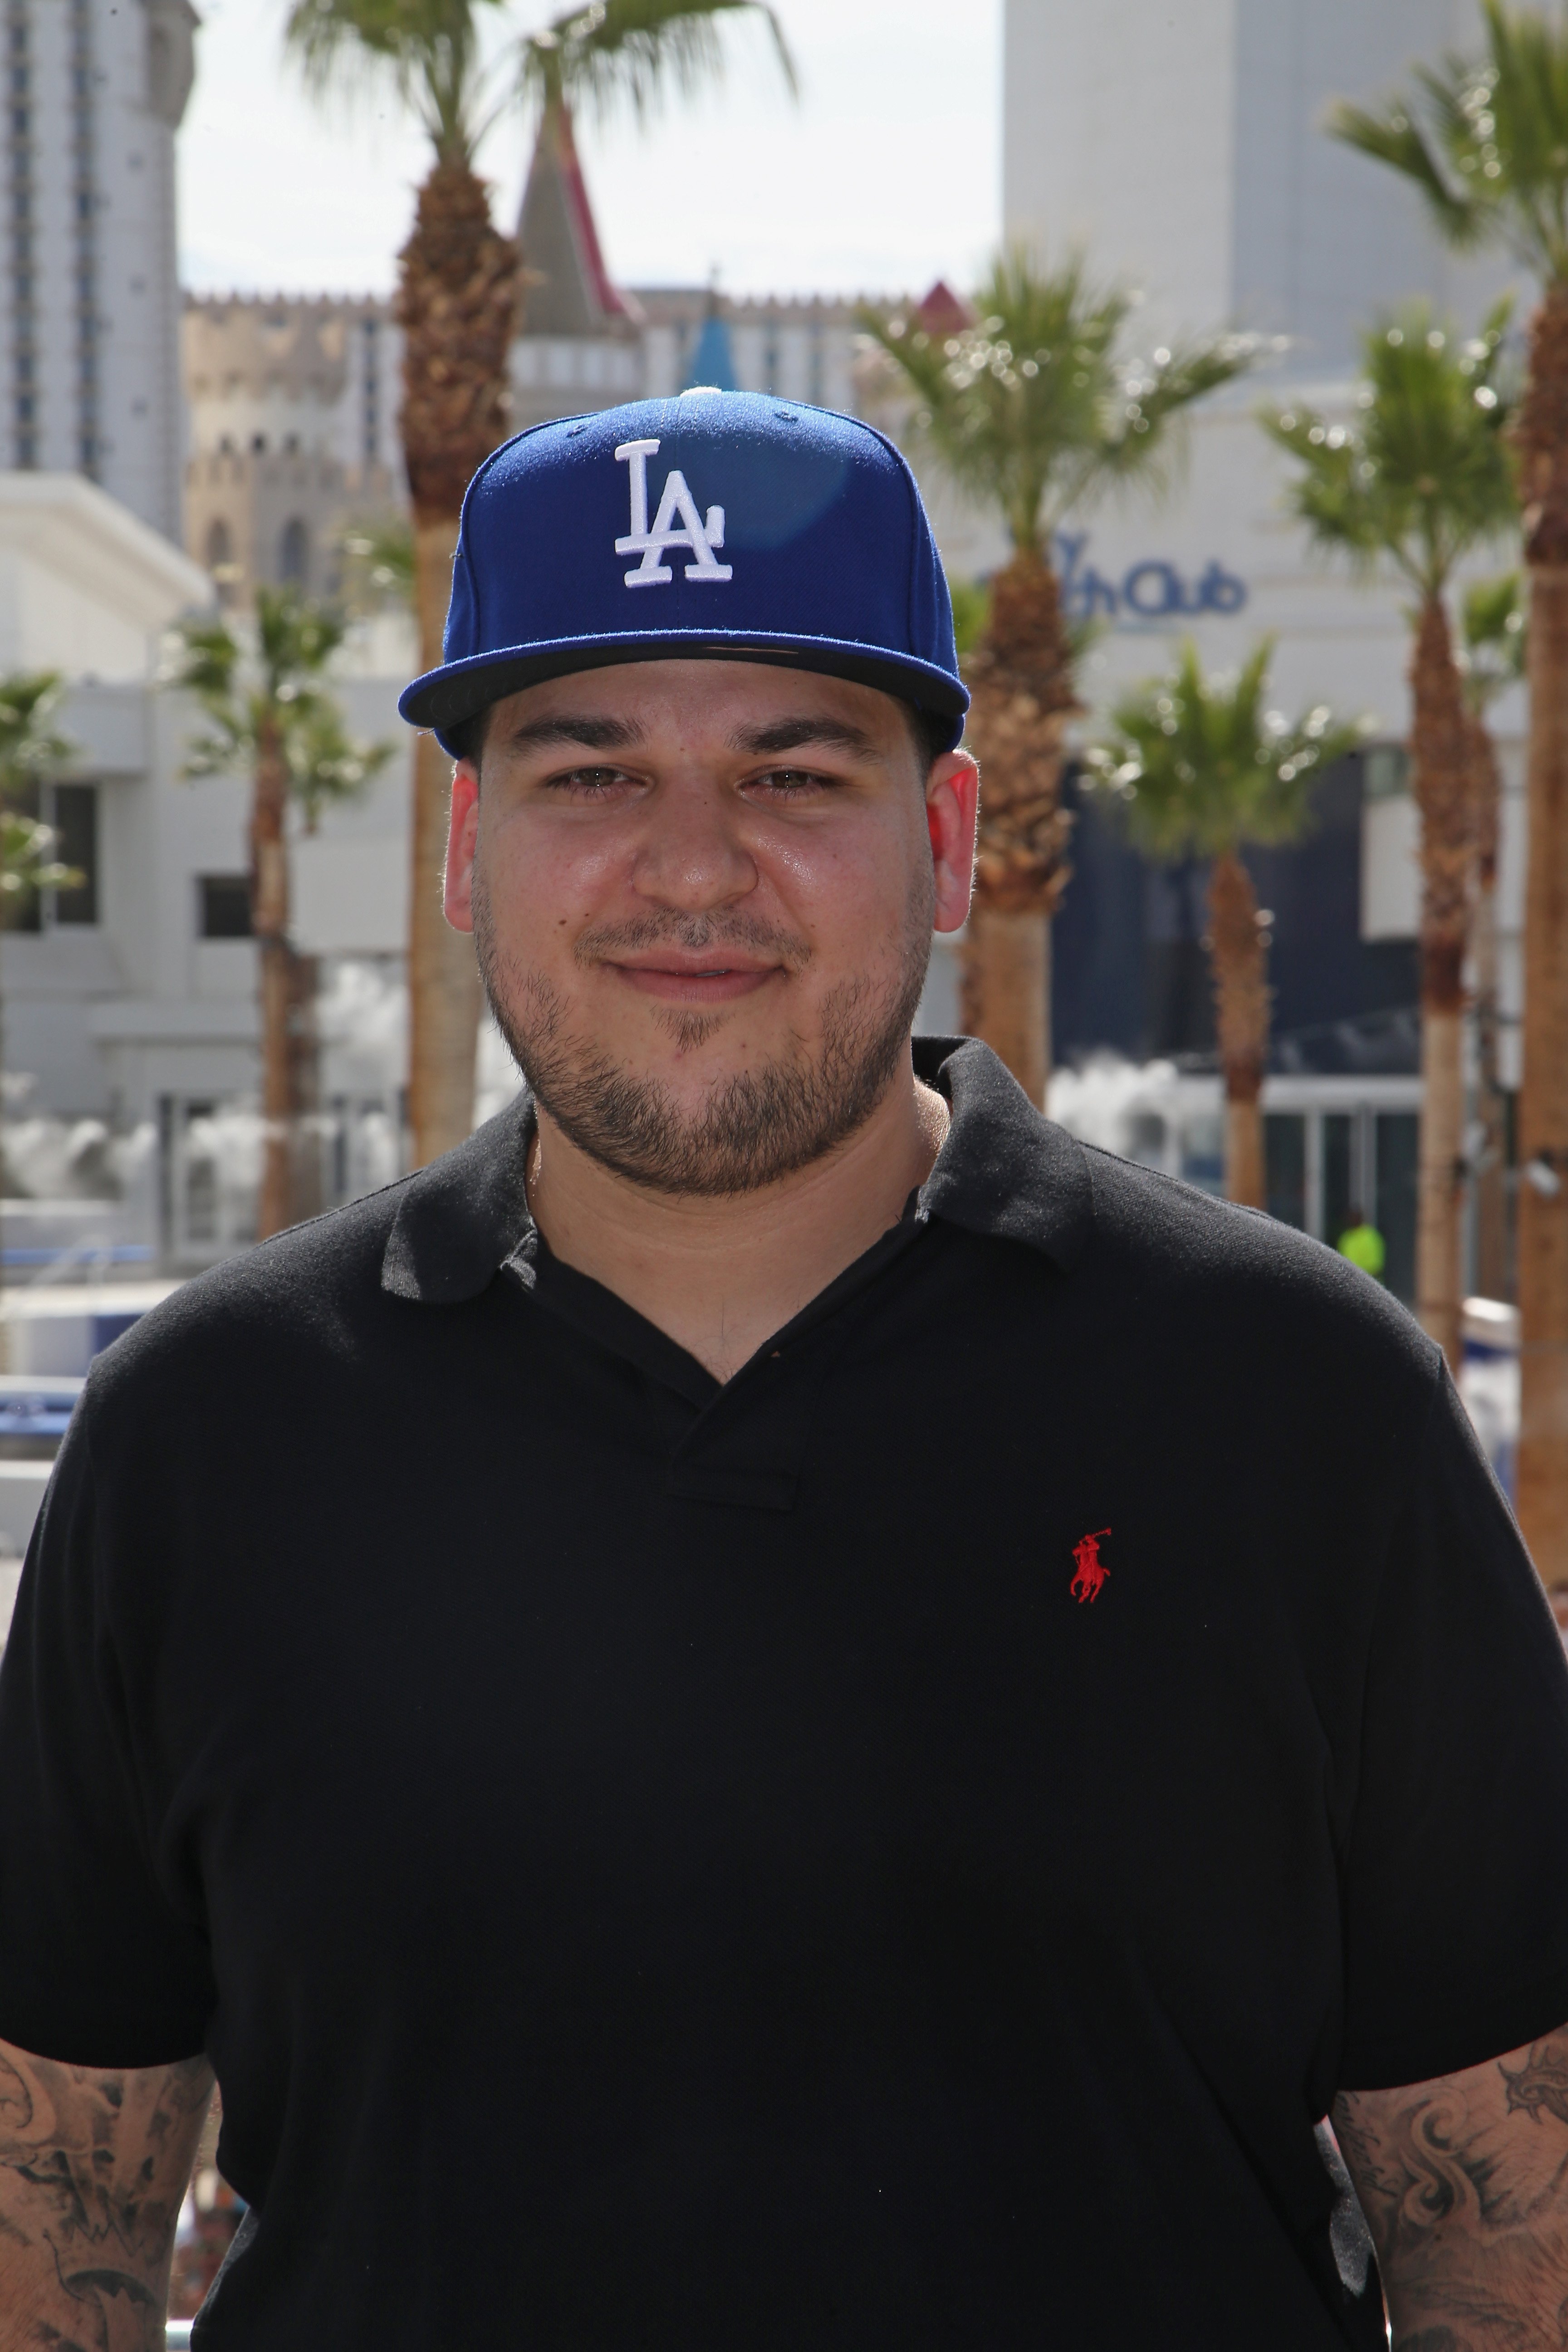 Rob Kardashian at the Sky Beach Club at the Tropicana Las Vegas on May 28, 2016 | Source: Getty Images/GlobalImagesUkraine